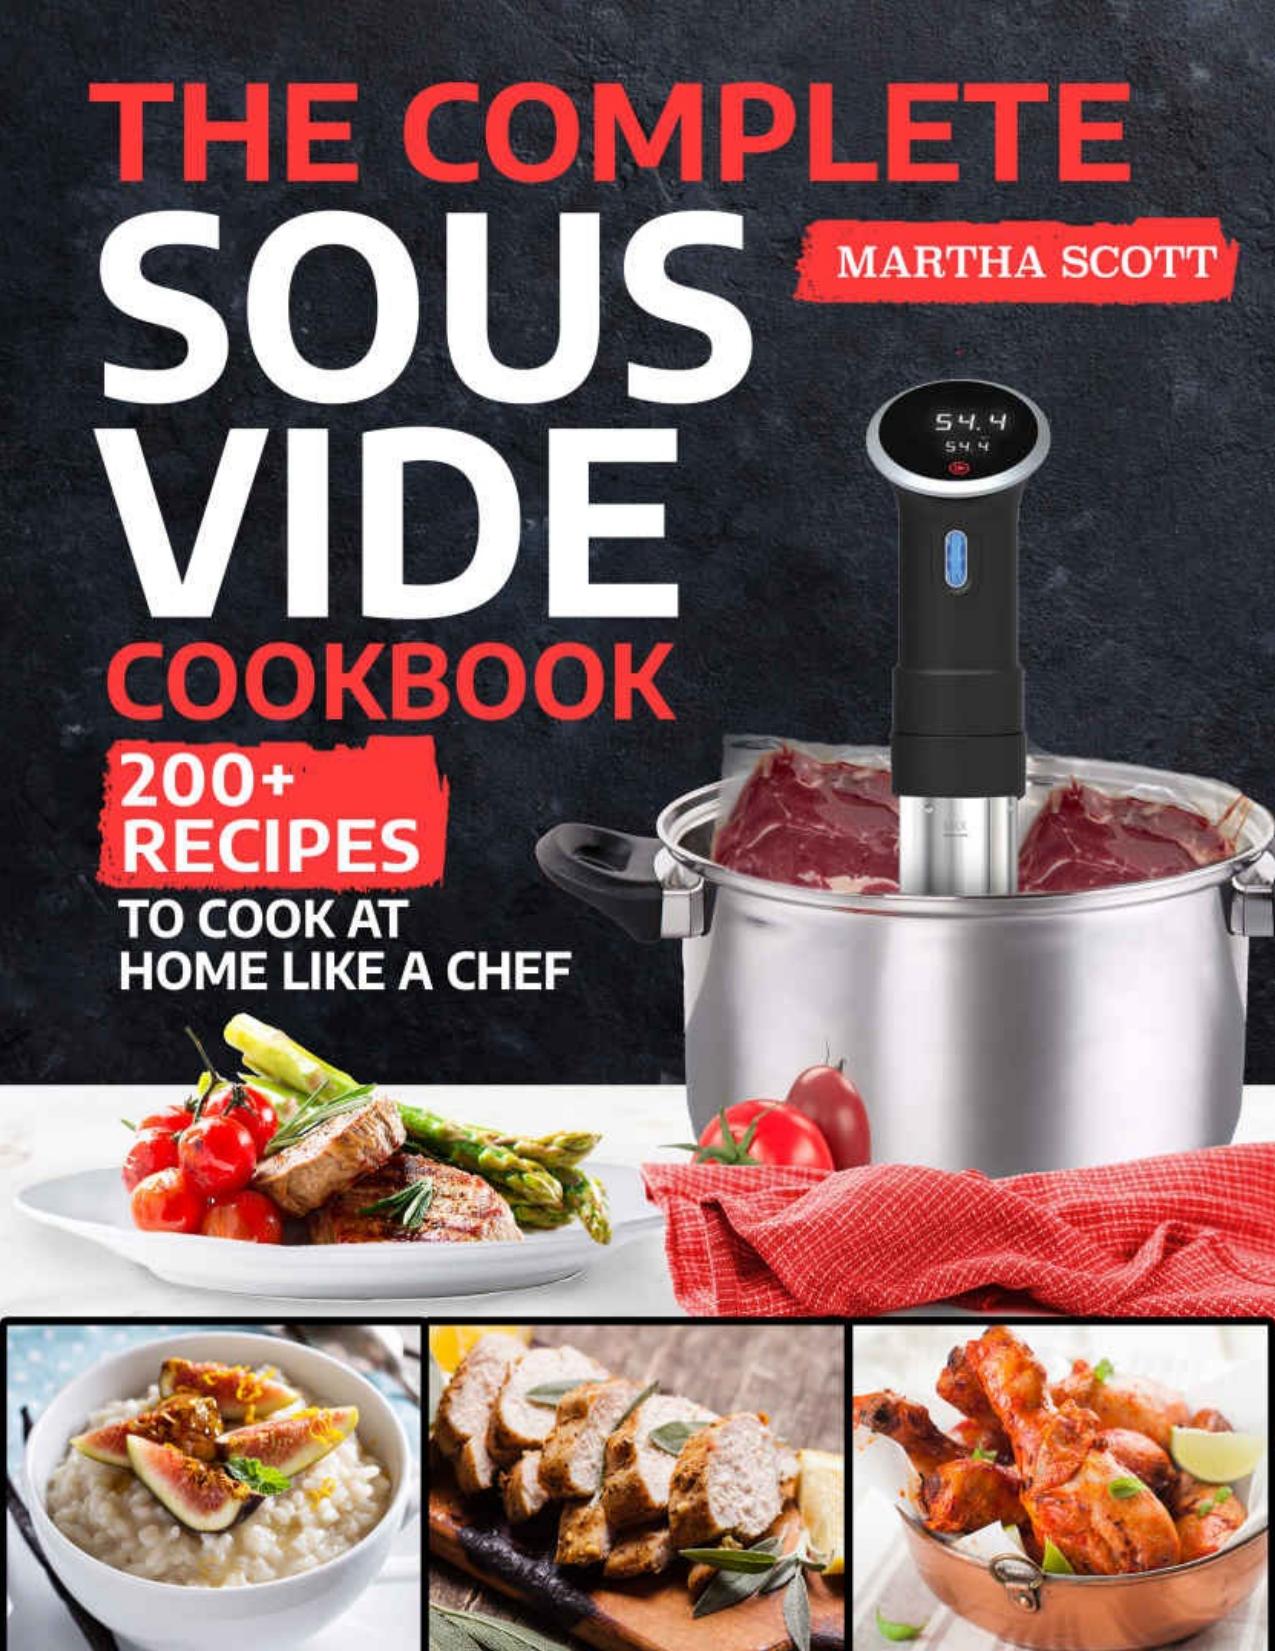 The Complete Sous Vide Cookbook: 200+ Recipes to Cook at Home Like a Chef by Martha Scott